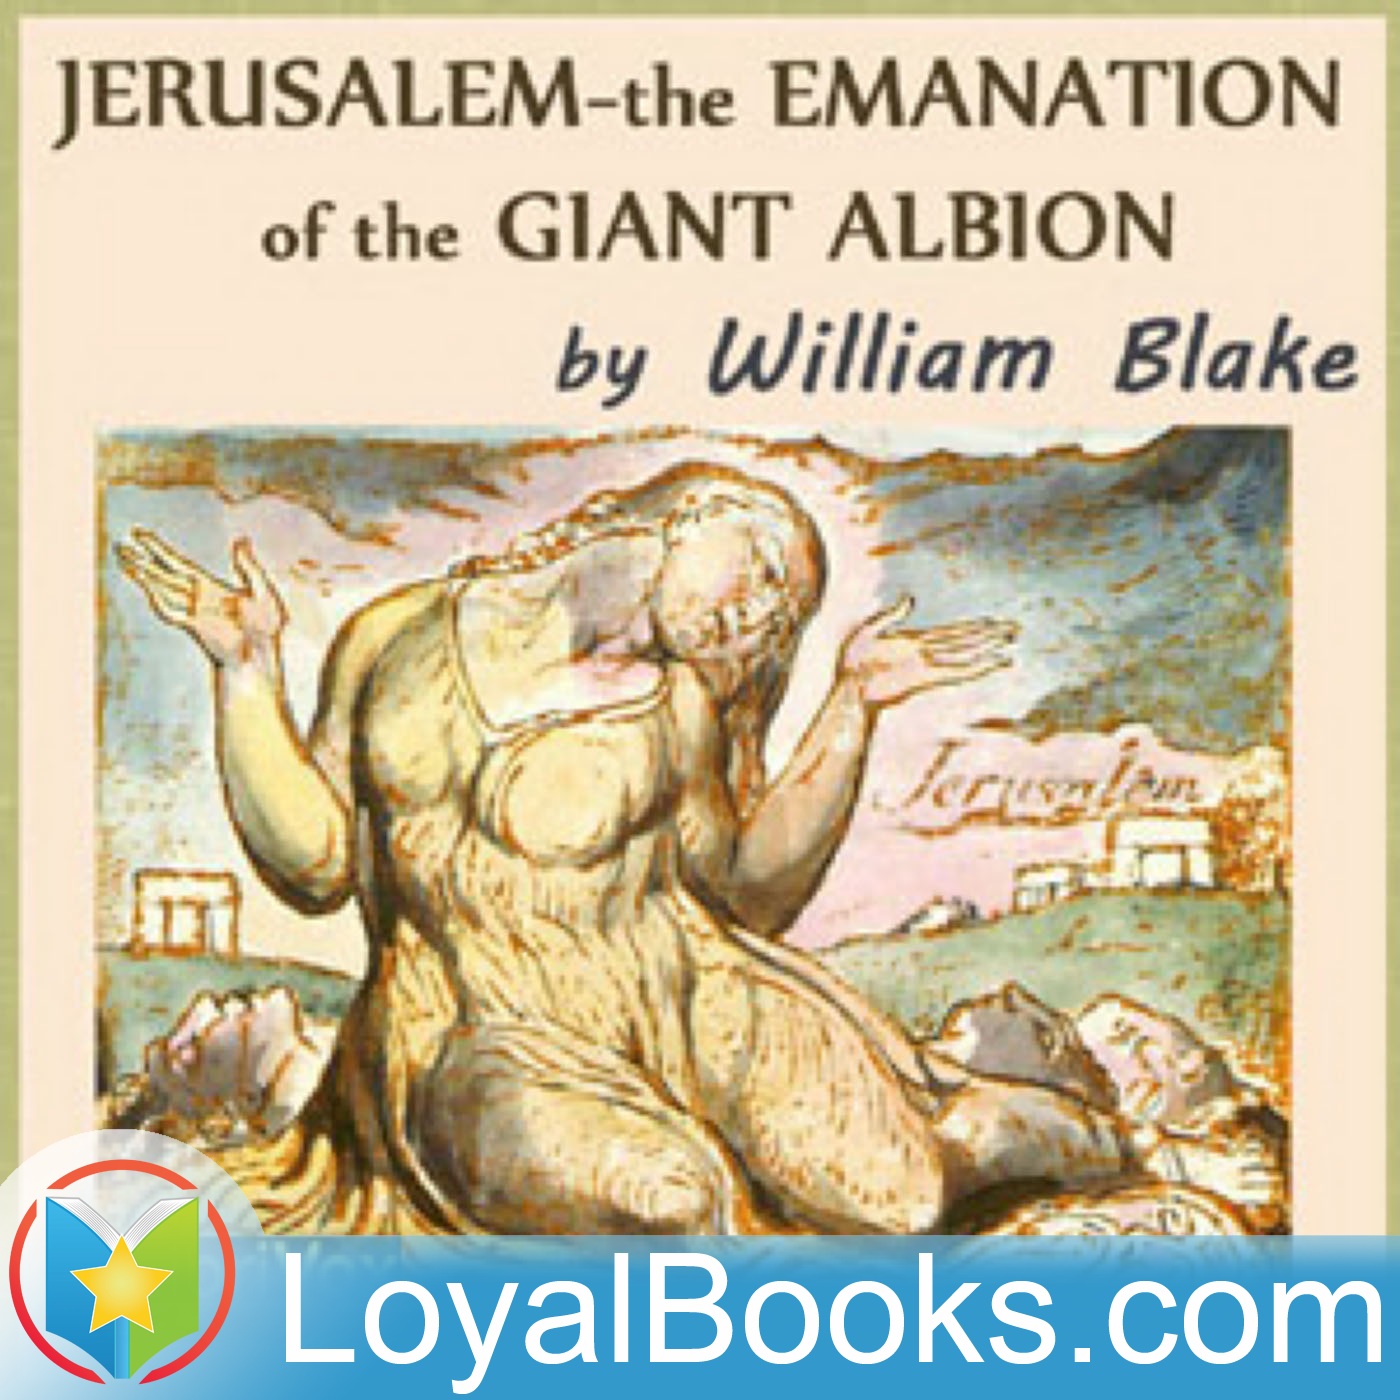 Jerusalem - The Emanation of the Giant Albion by William Blake